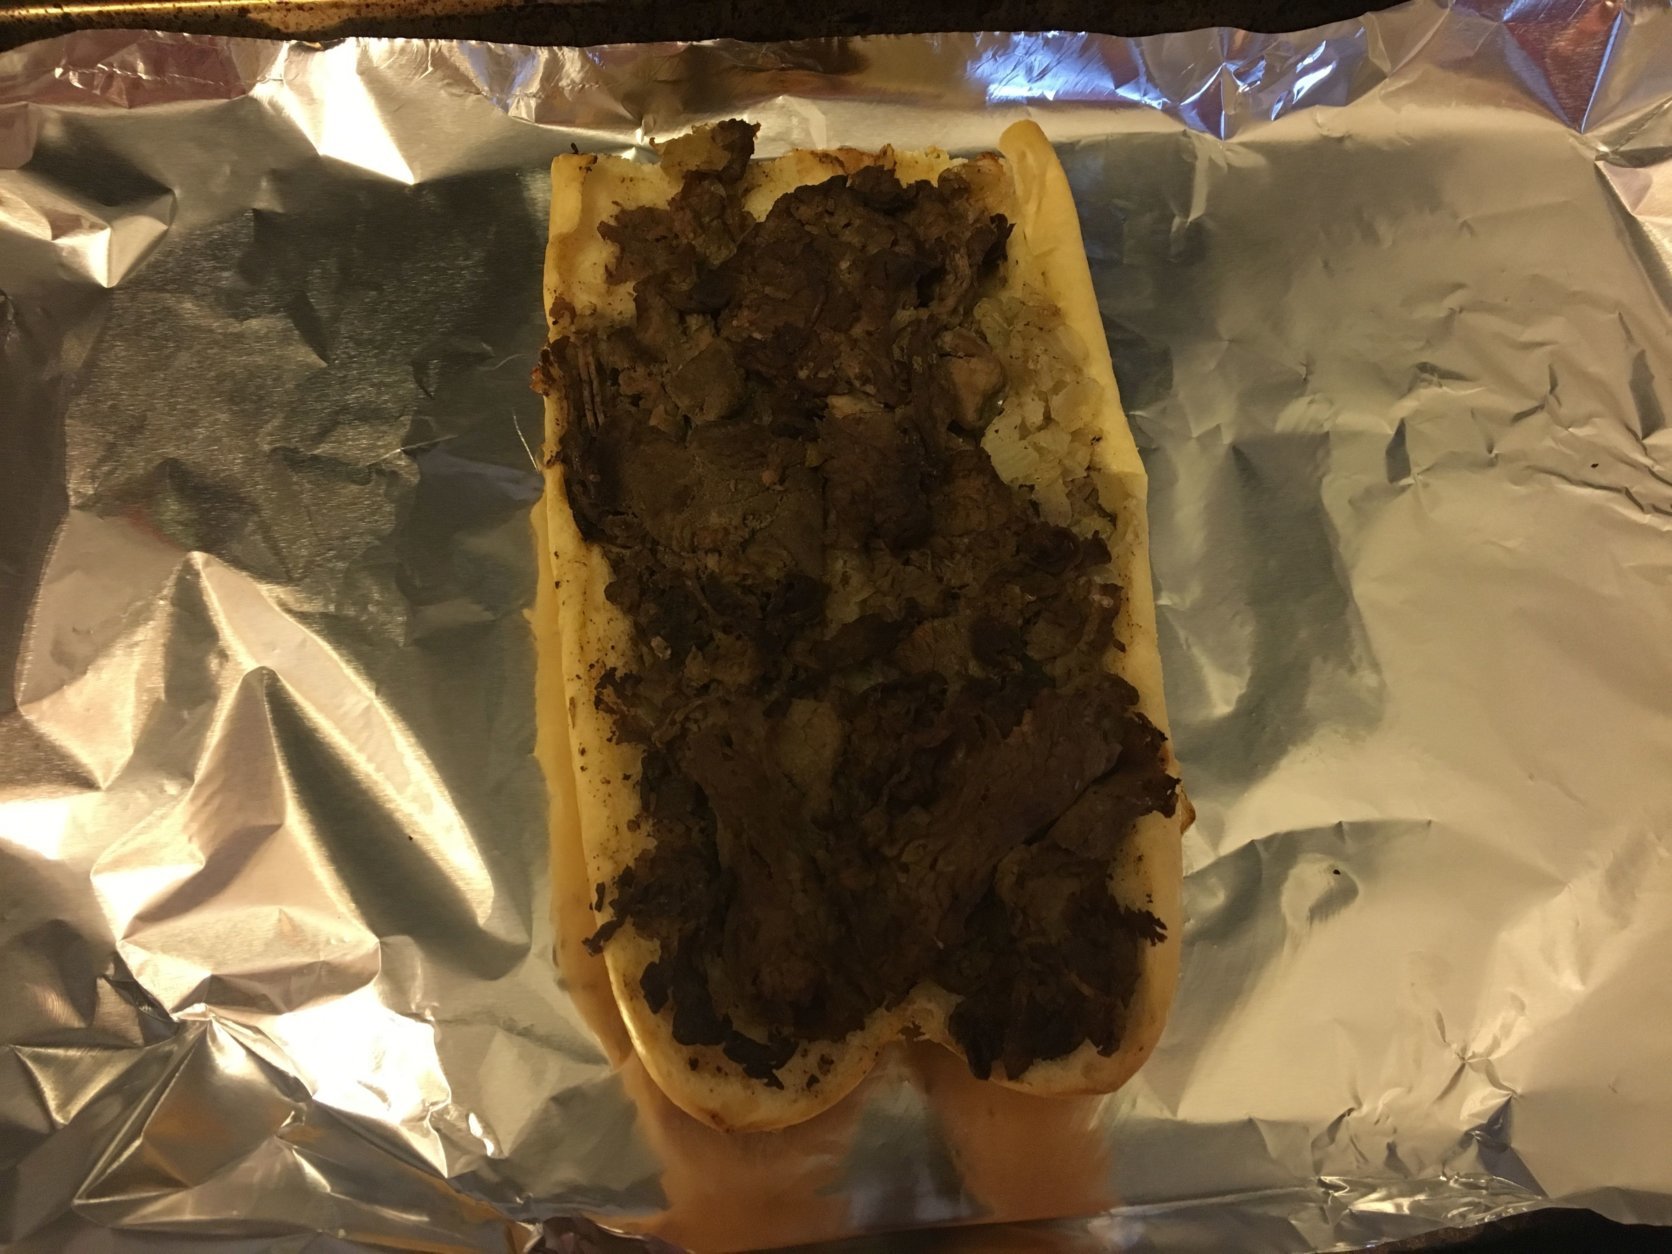 "The bread crease completely fell apart," she said, and there was a temperature issue. "The whole sandwich tended to lose heat more quickly than when it's fresh off the grill, so about halfway in, it was already cold." (WTOP/Jamie Forzato)